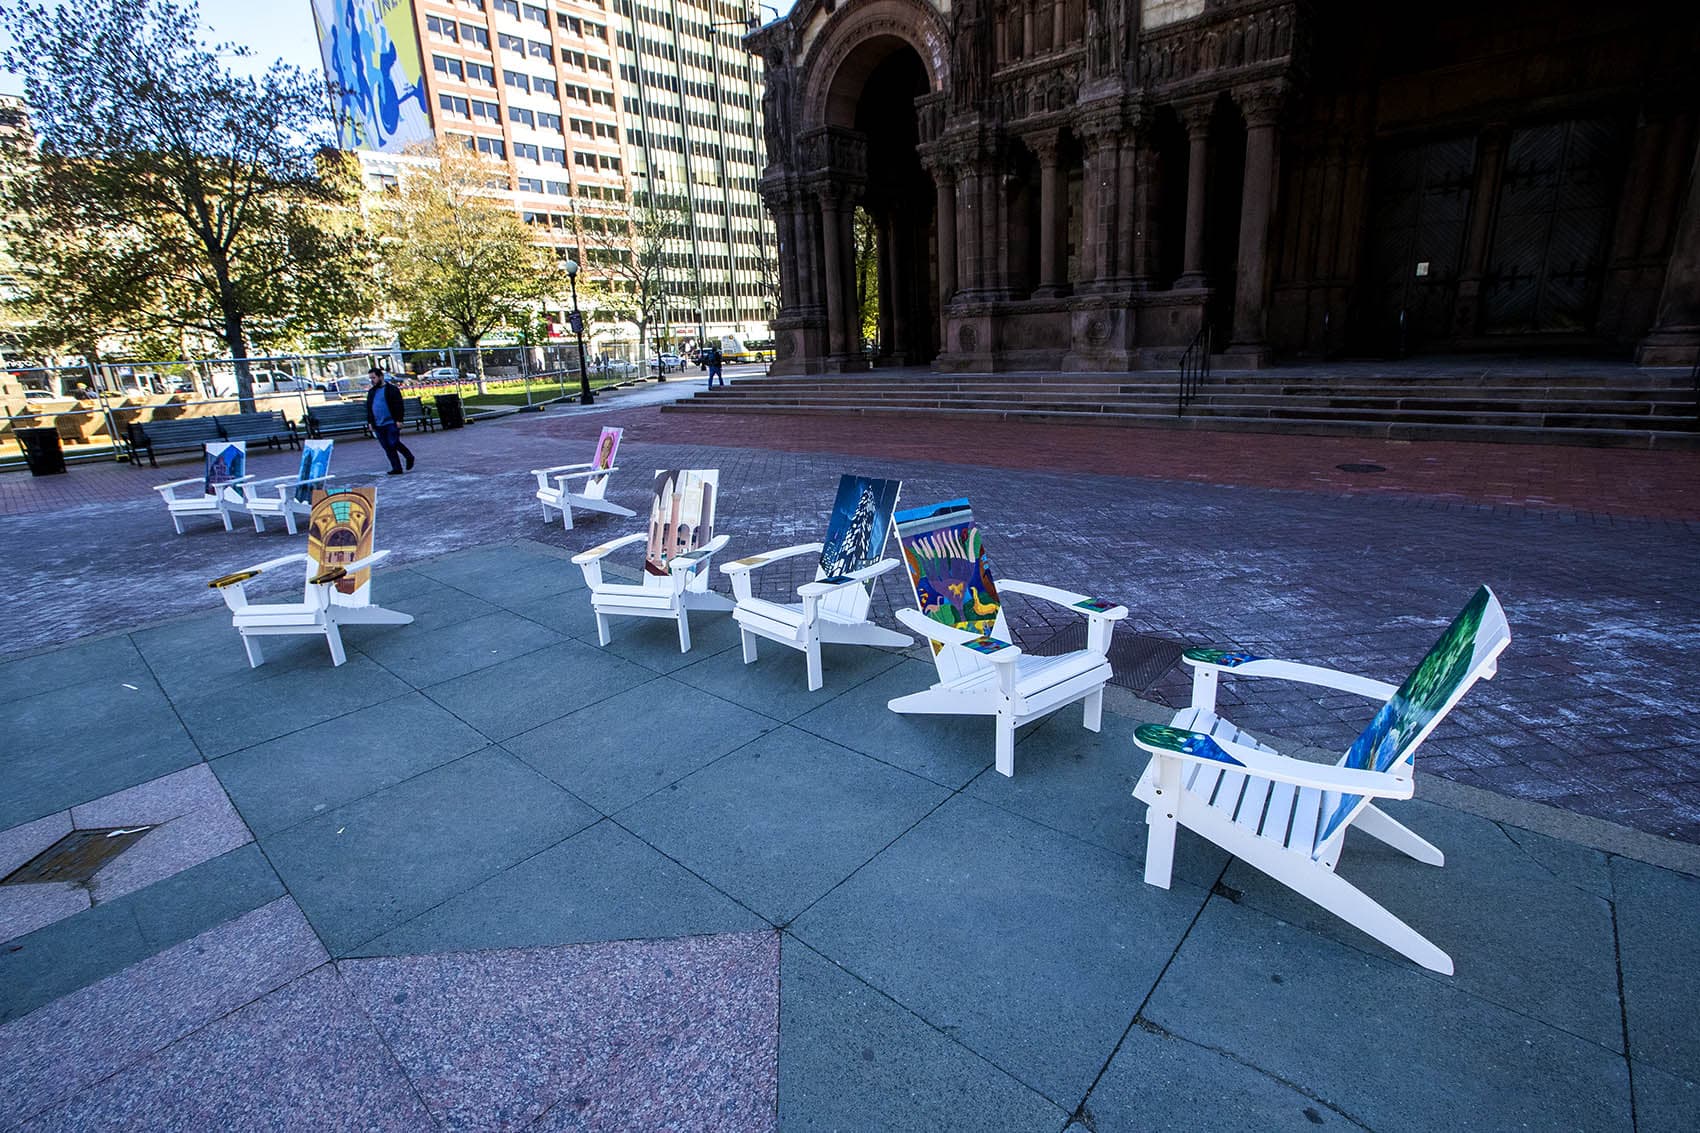 The Artists For Humanity Adirondack chairs on display at Copley Square (Jesse Costa/WBUR)